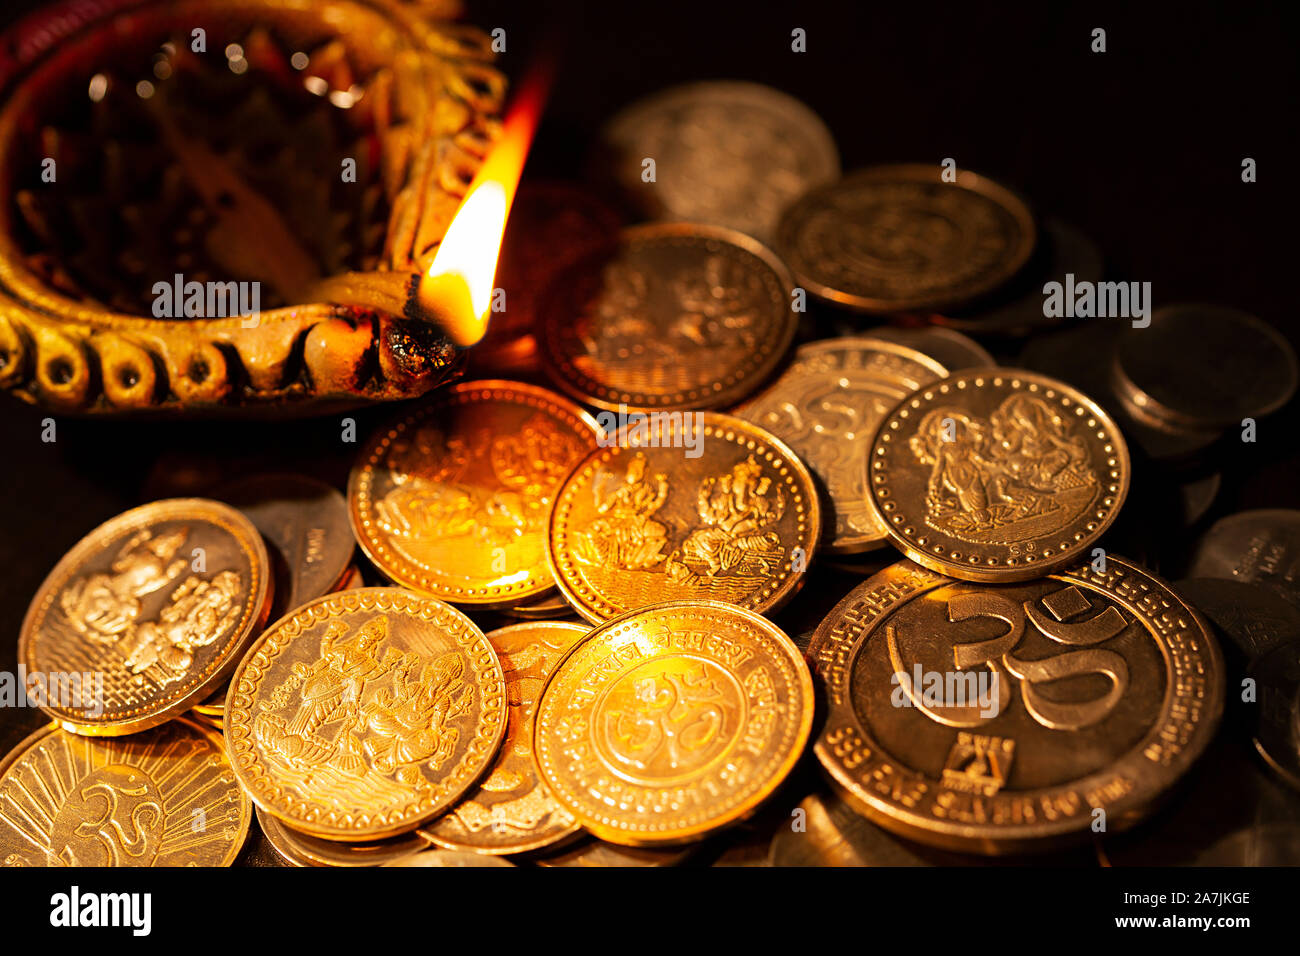 Diwali oil lamps with gold coins during Diwali festival Celebration Stock Photo